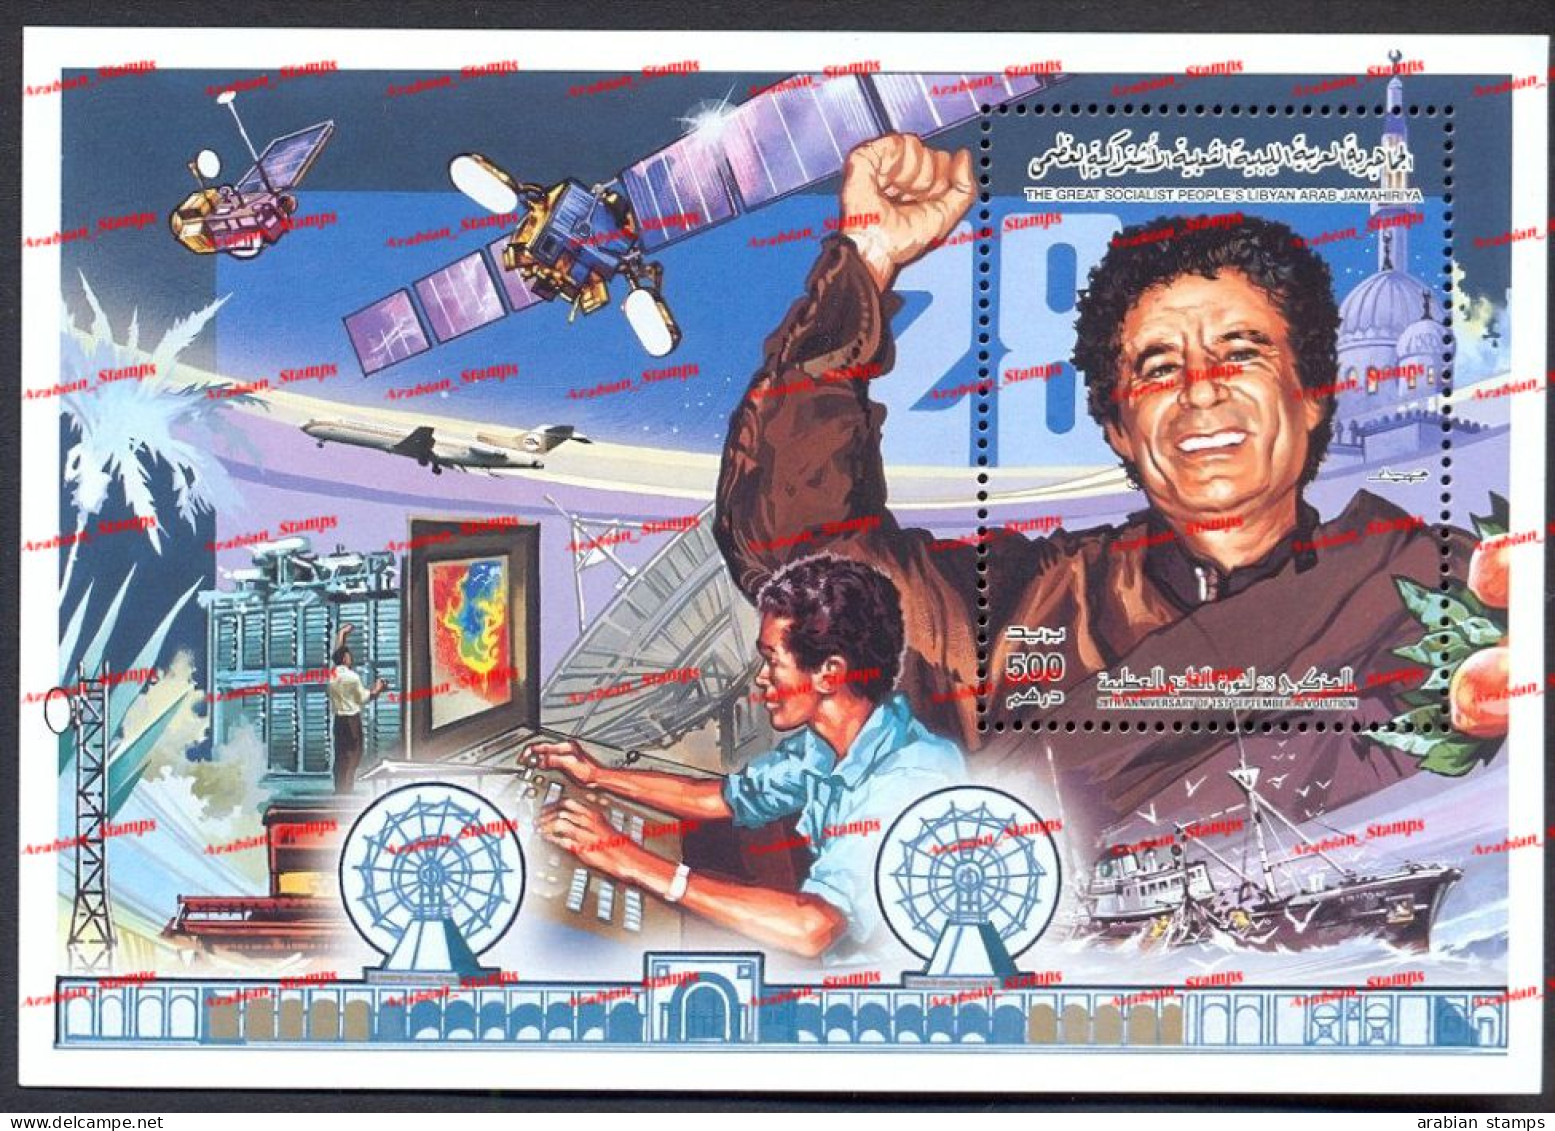 LIBYA 1997 28TH ANNIVERSARY OF REVOLUTION SS MNH COMPUTER EDUCATION SATELLITE SHIP BIRD DOVE MOSQUE PLANE SPACE TRACTOR - Libye